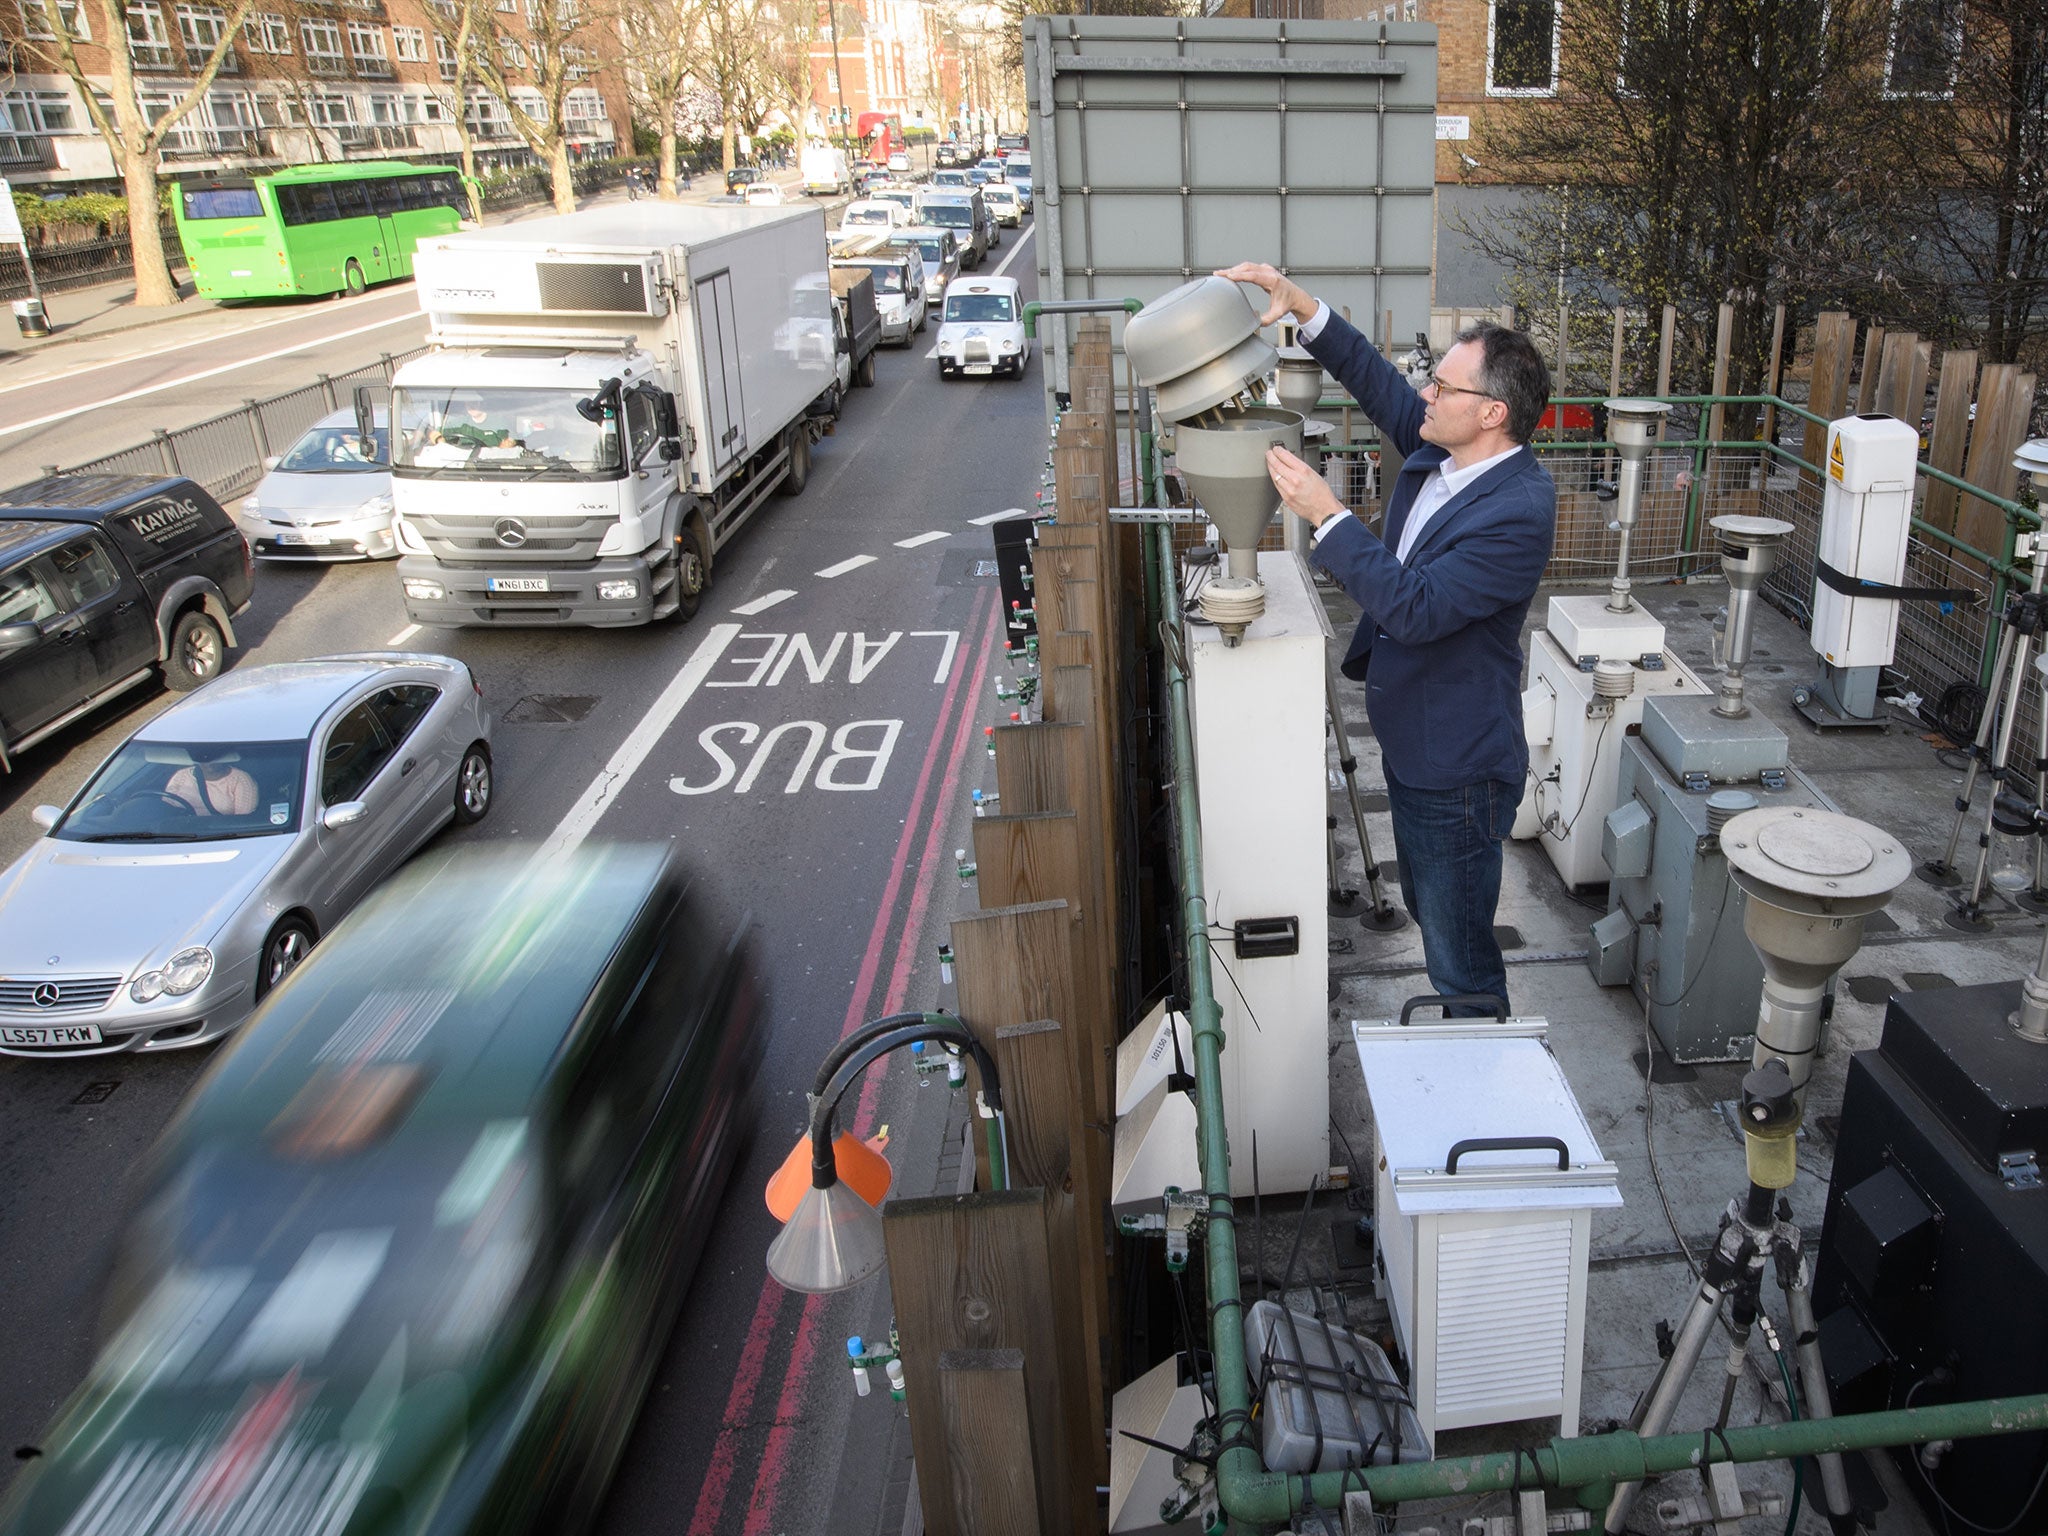 A pollution measurement station on Marylebone Road in central London; the Government estimates that meeting targets for the pollutant nitrogen dioxide will not be achieved until 2026.